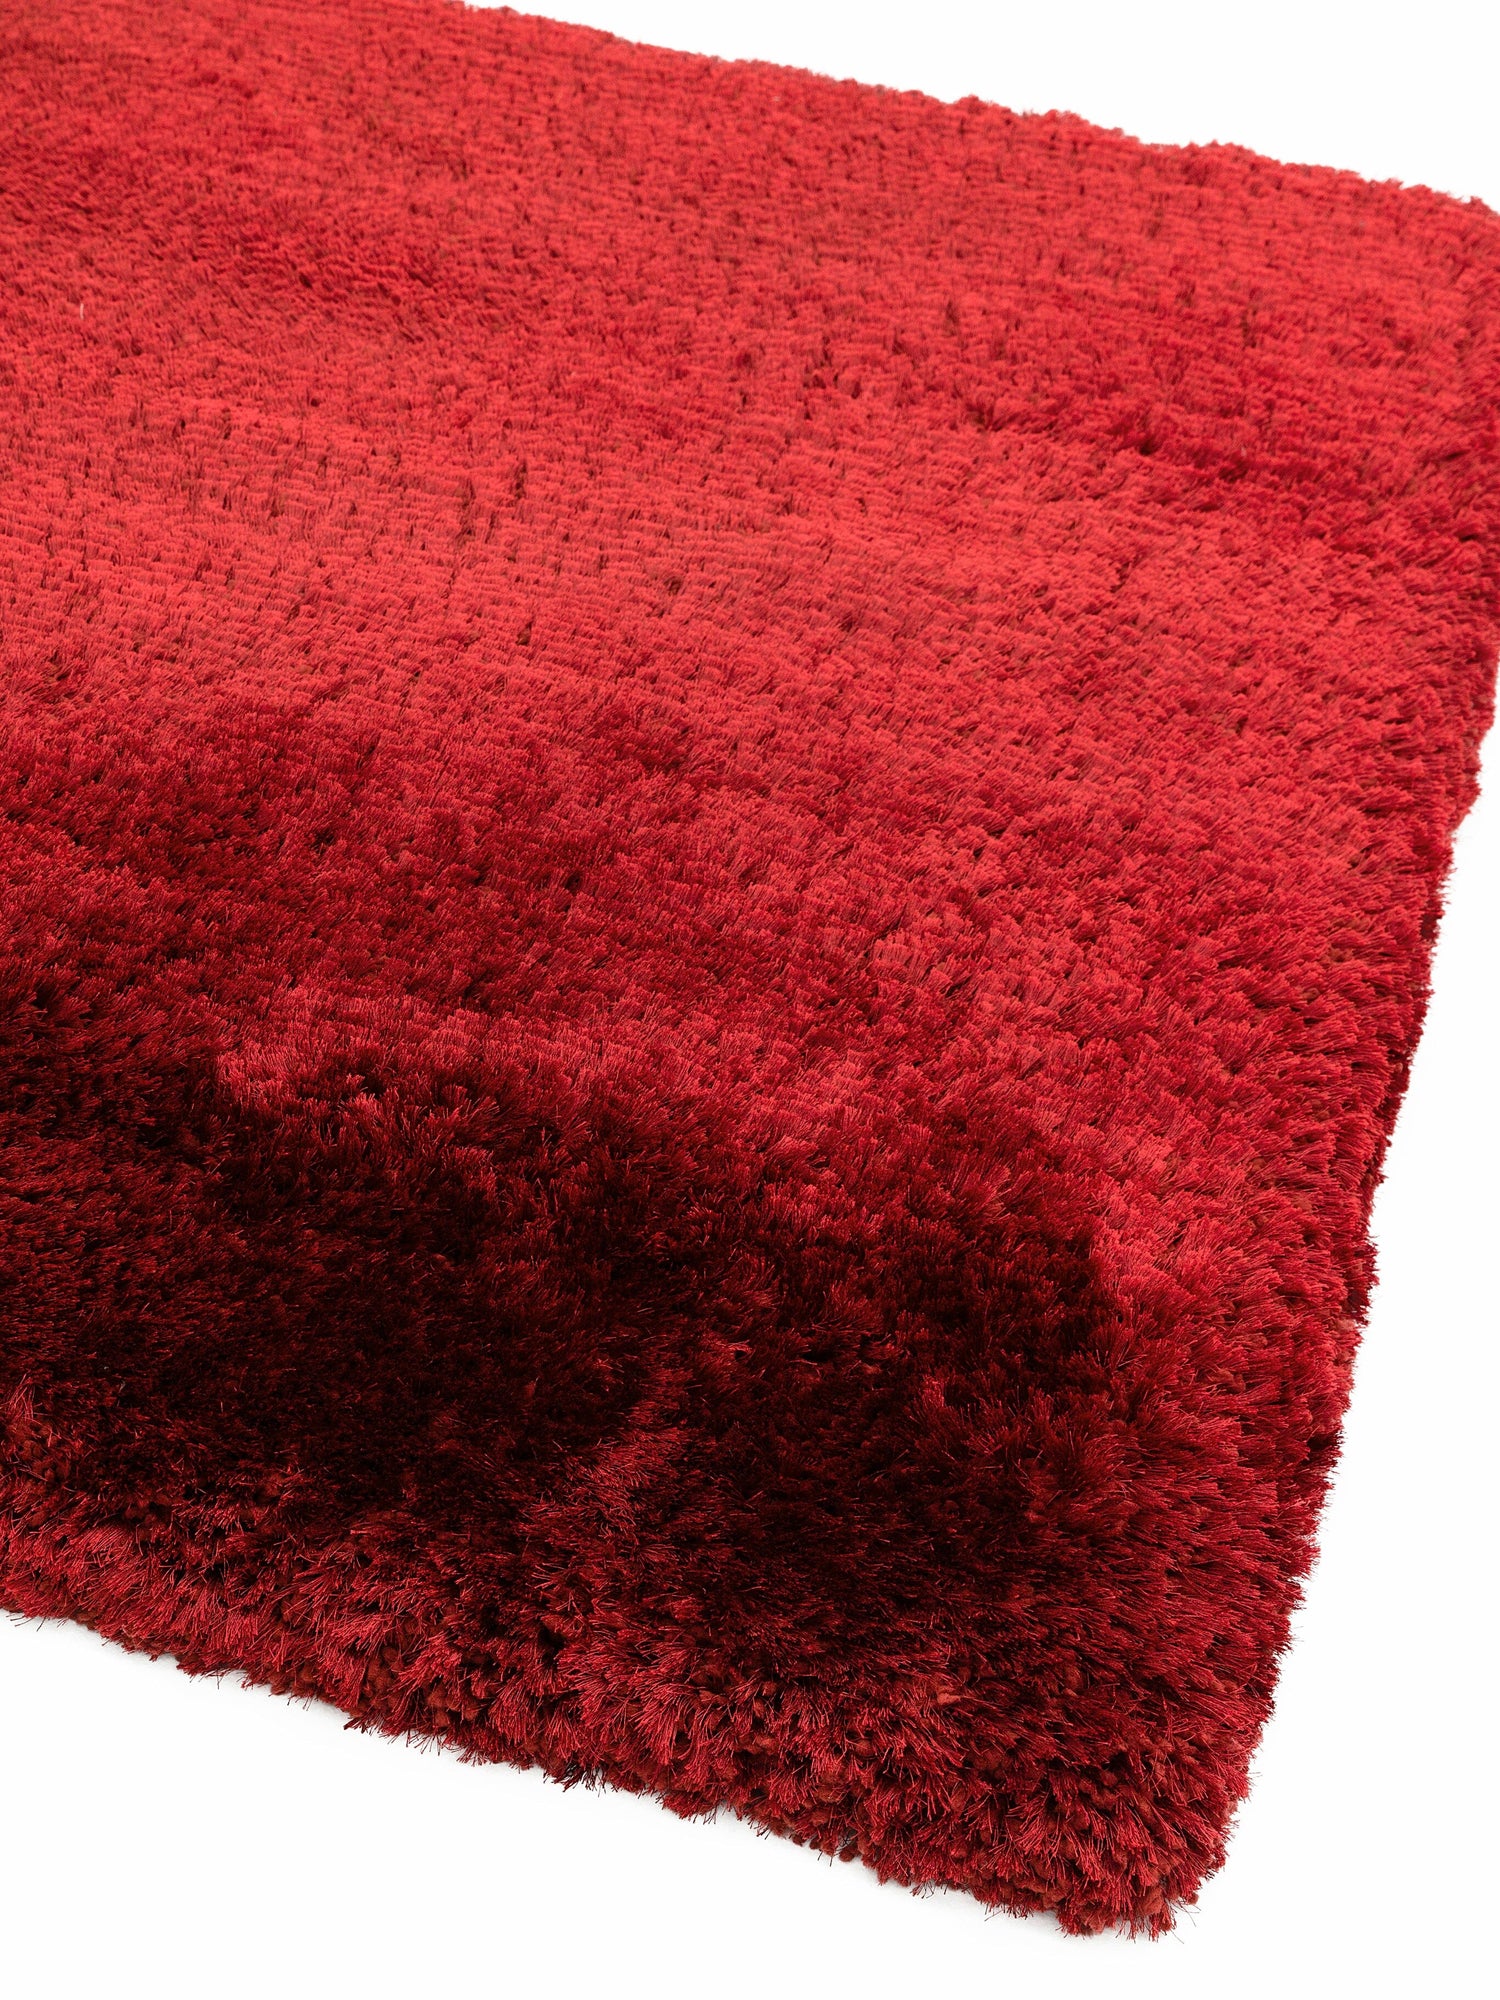  Asiatic Carpets-Asiatic Carpets Plush Hand Woven Rug Red - 160 x 230cm-Red 245 